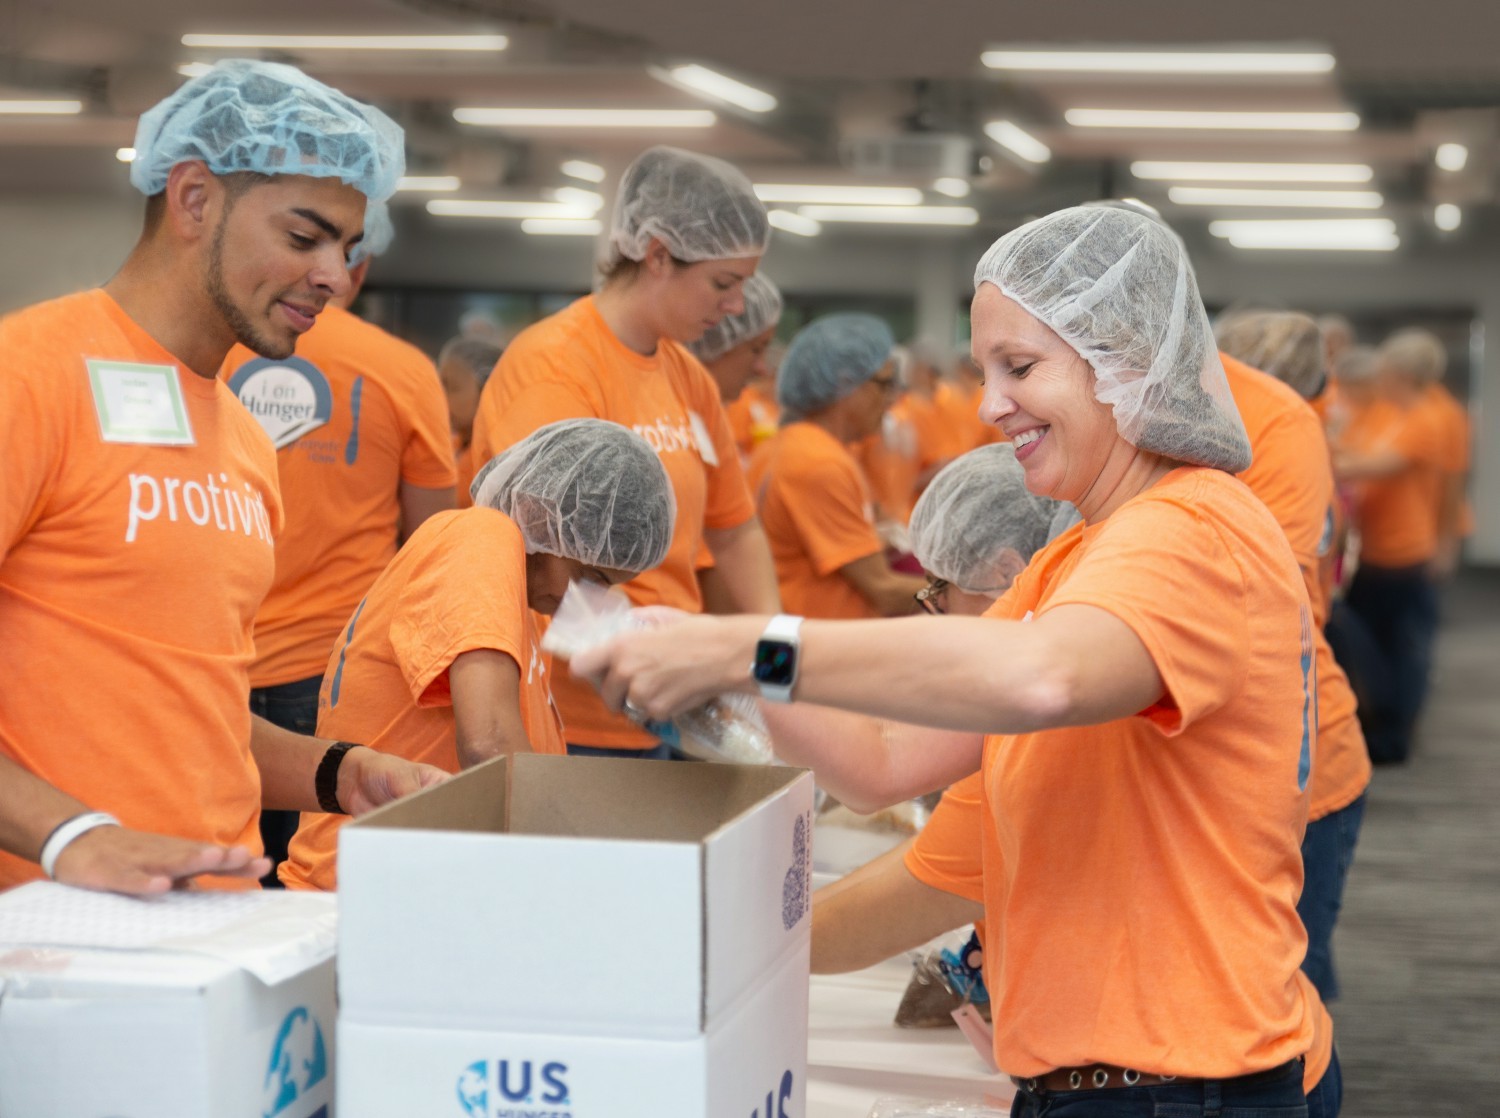 Our i on Hunger events have delivered more than 14 million meals globally to those in need.